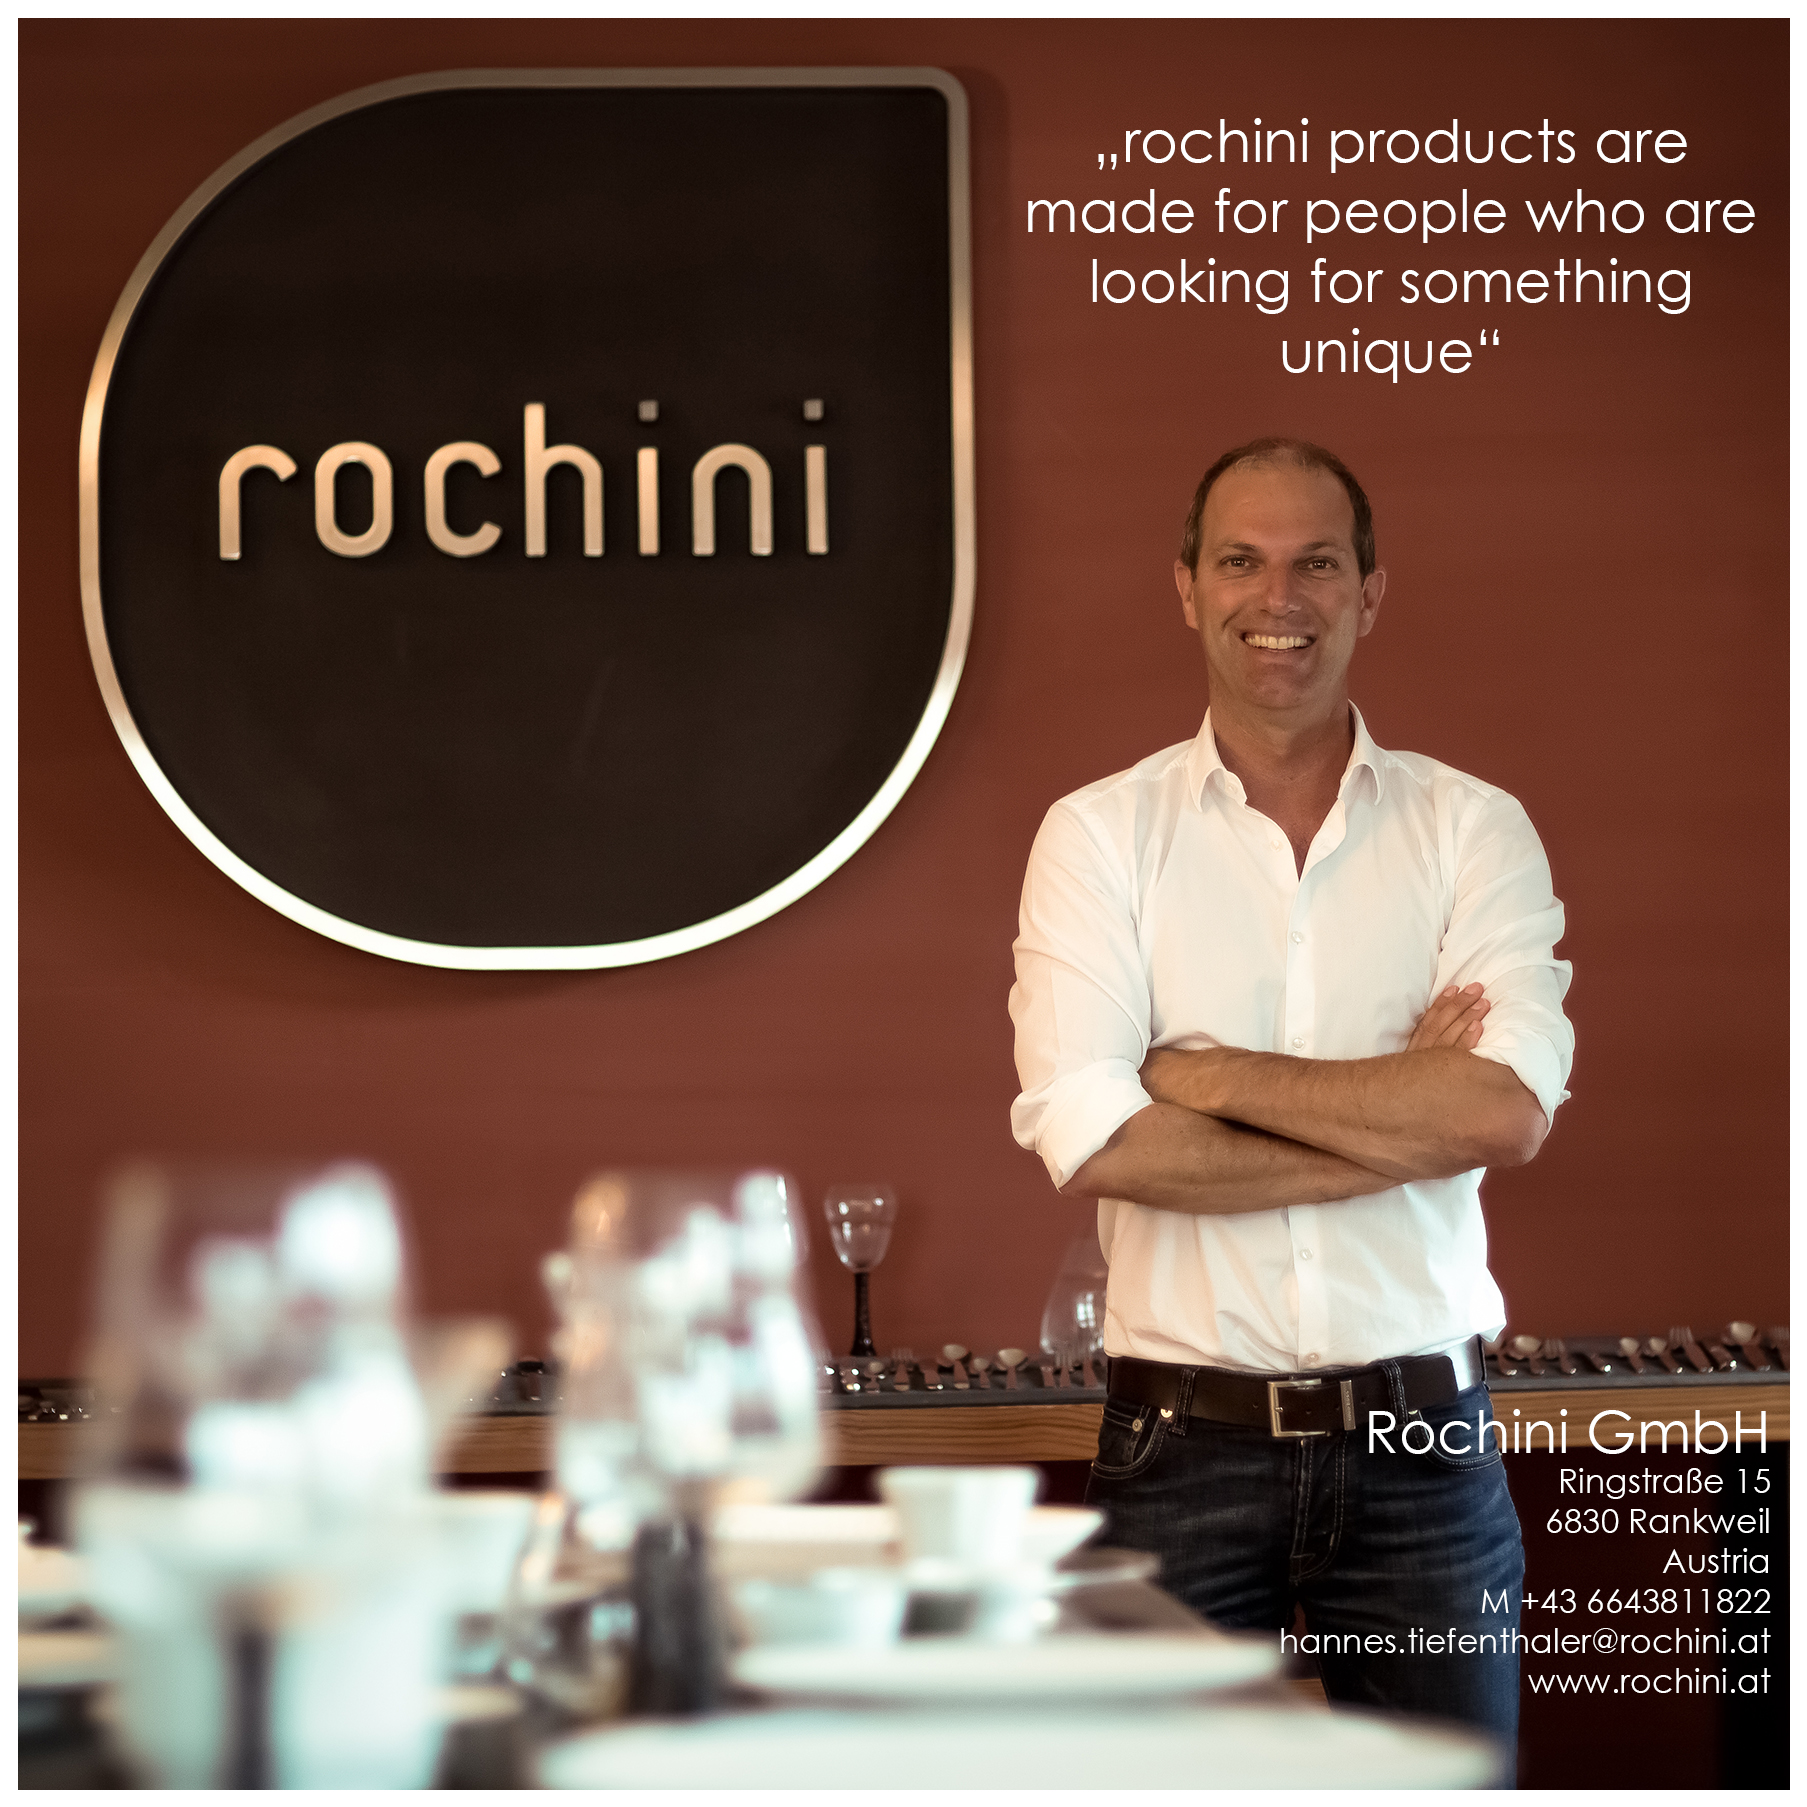 rochini "rochini products are made for people who are looking for something unique"